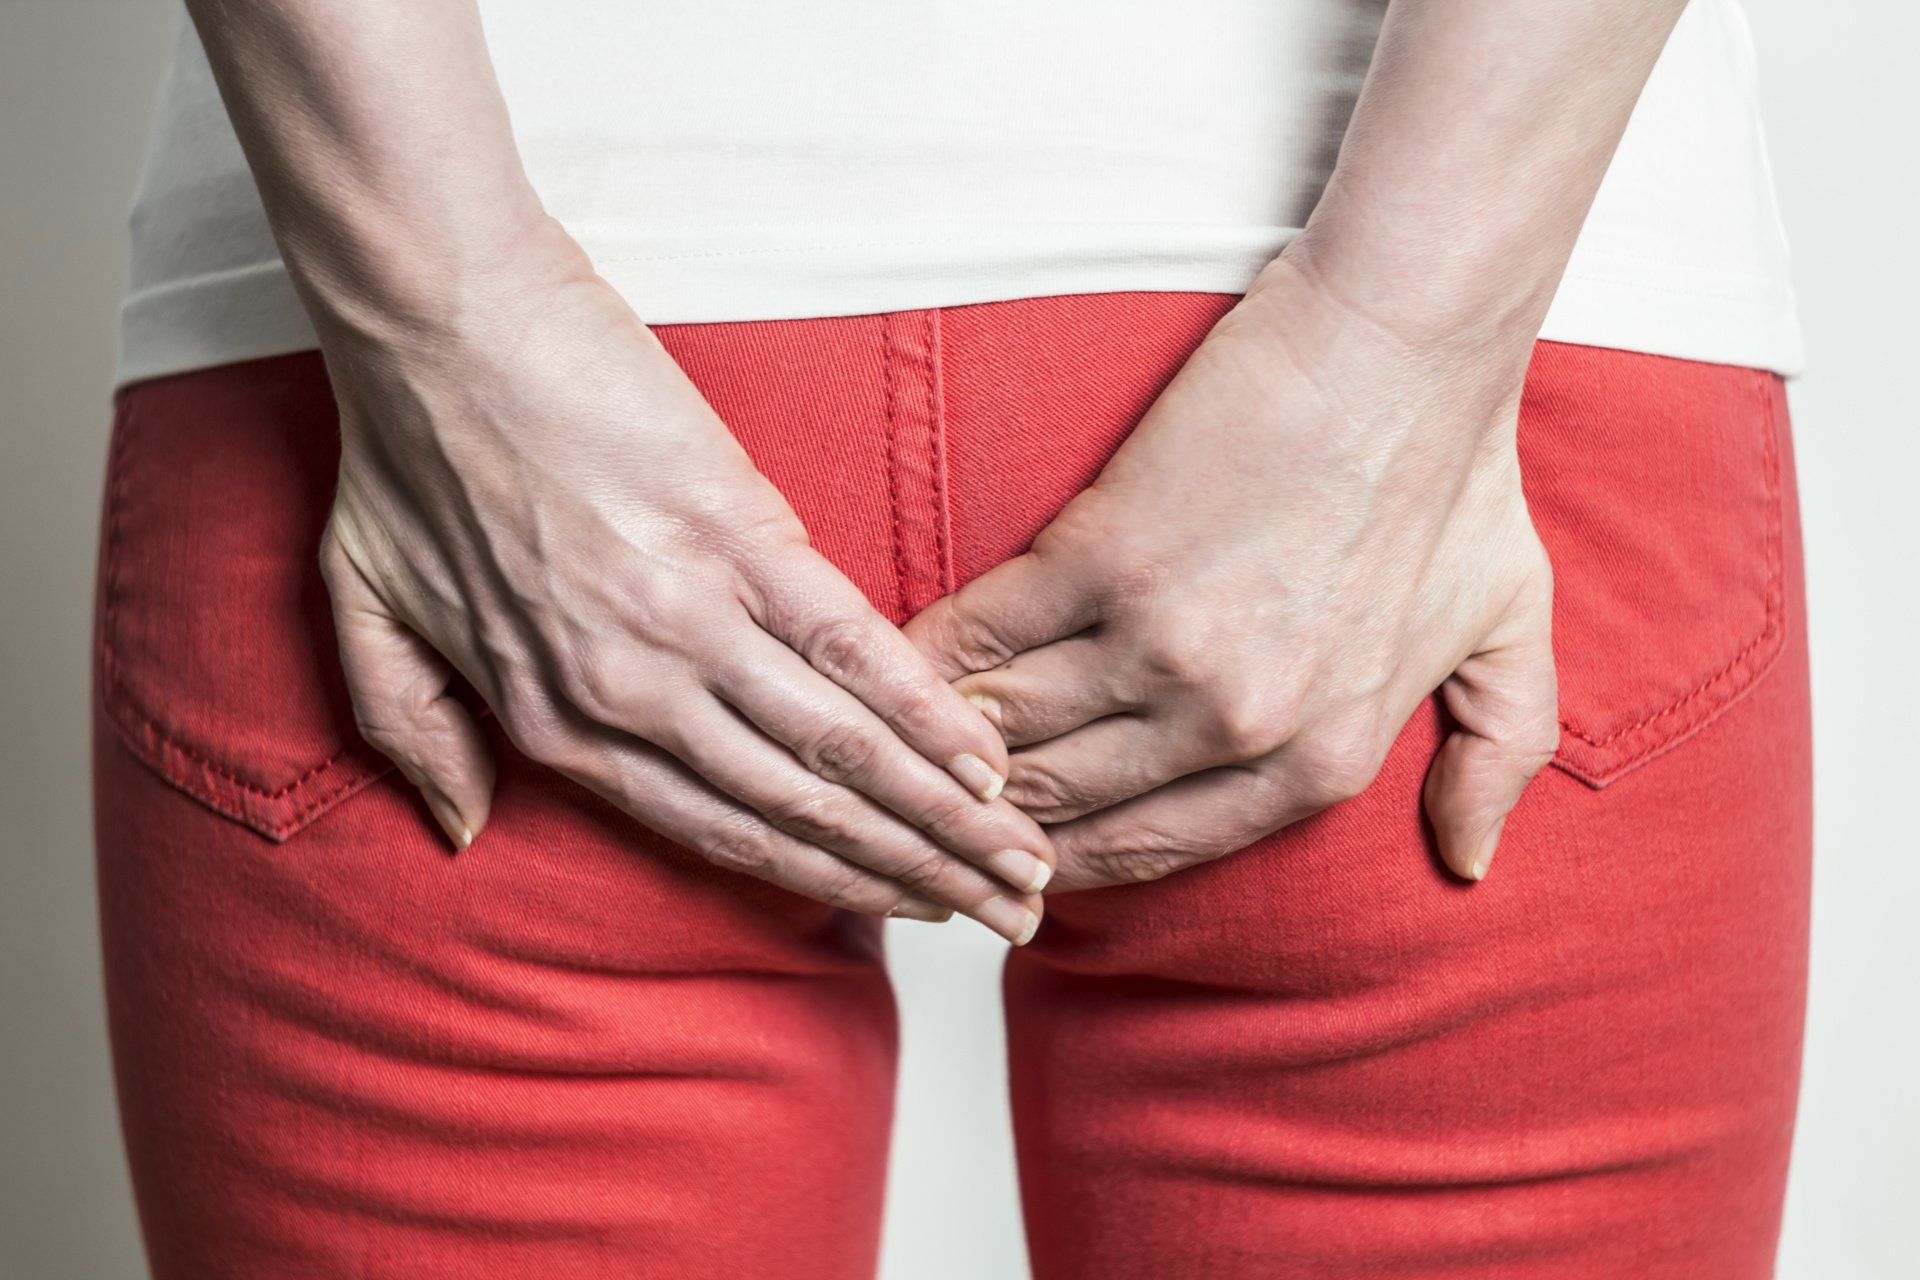 Hemorrhoid Banding: When Home Remedies are Not Enough